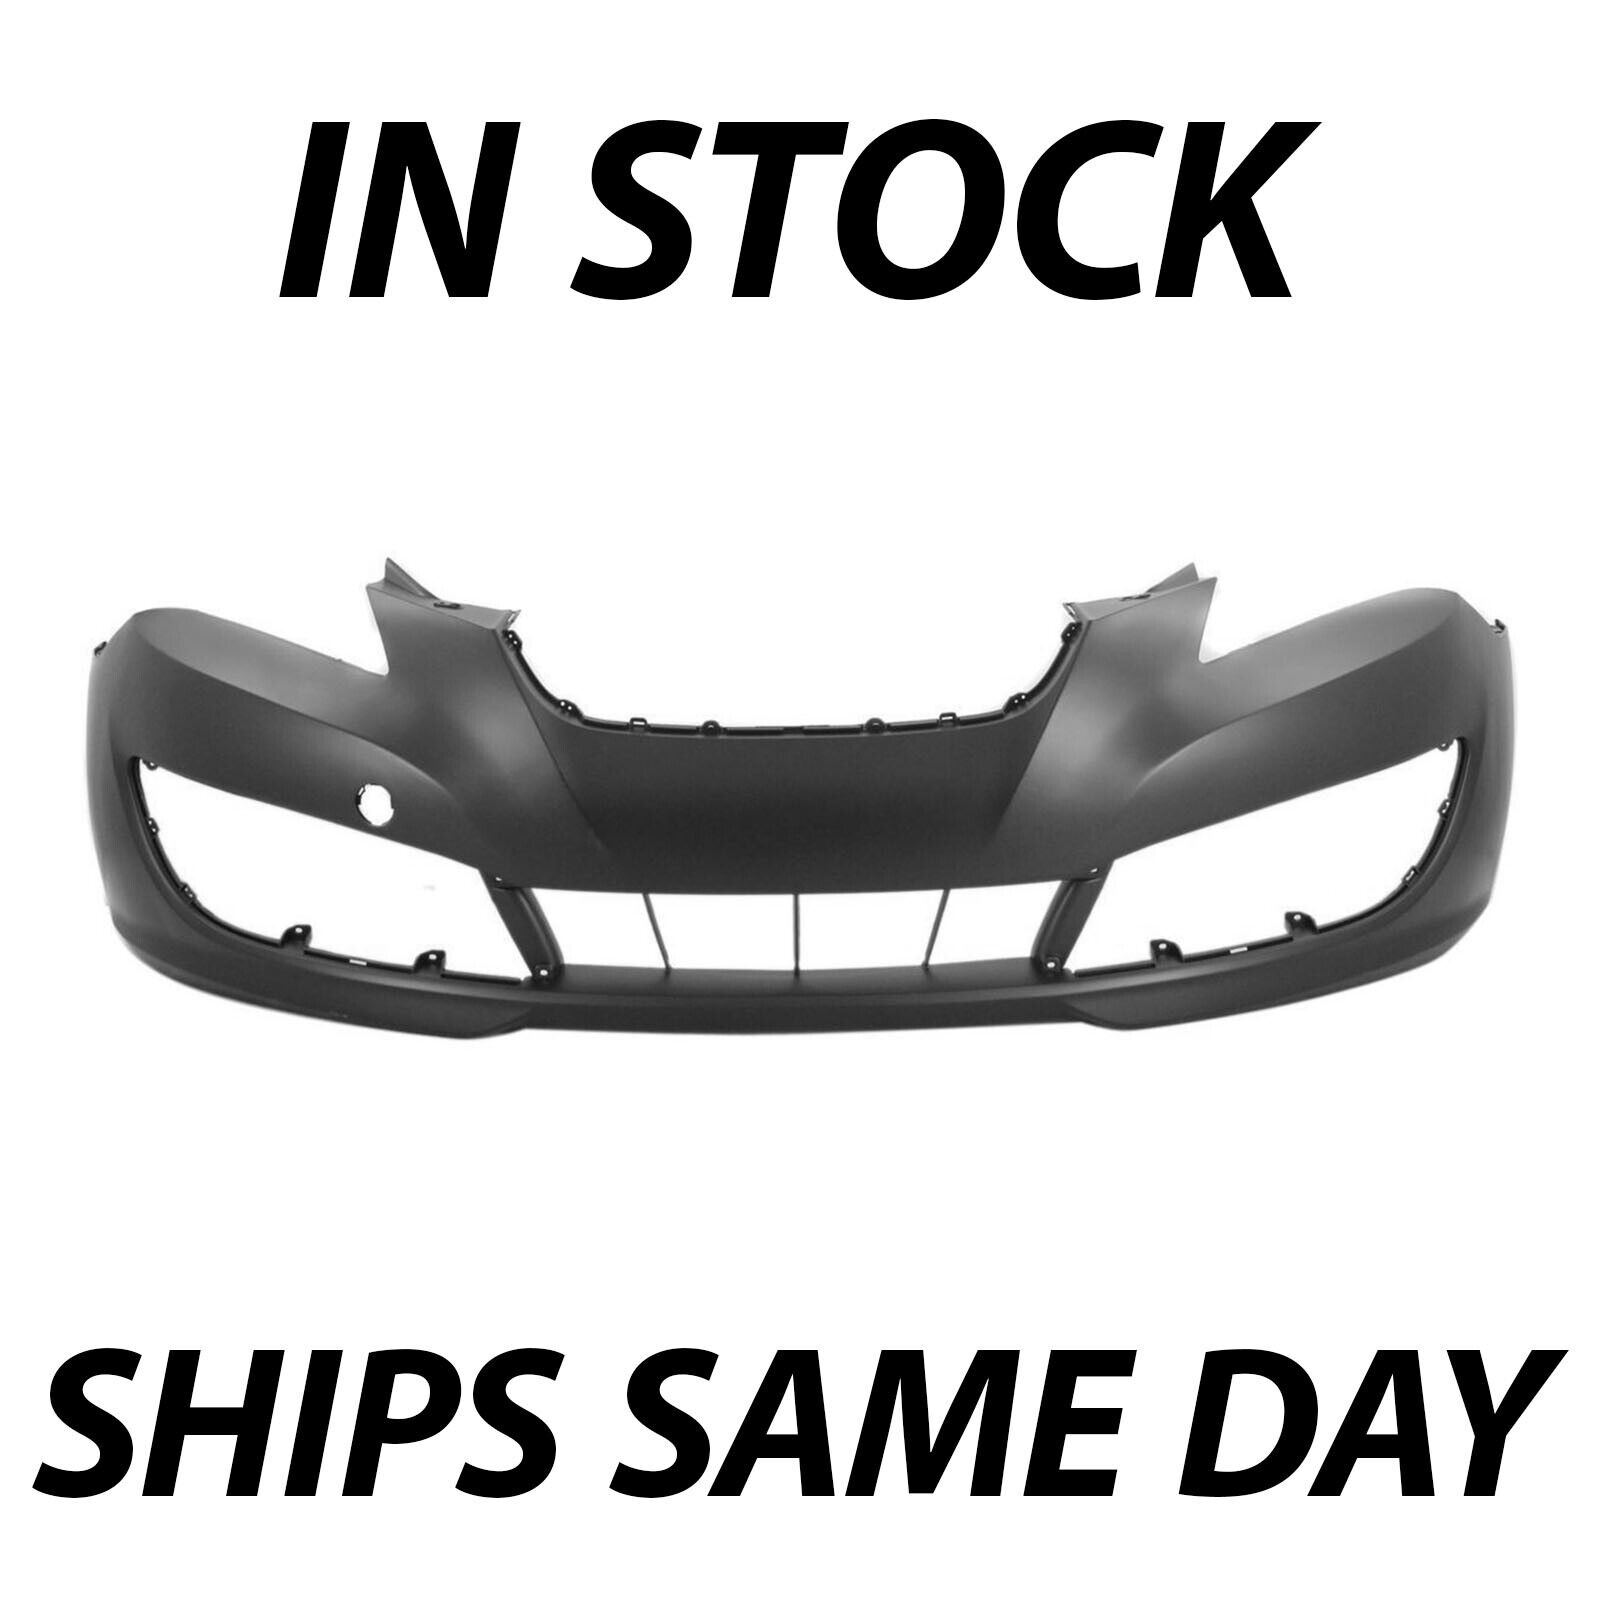 NEW Primered Front Bumper Cover Fascia for 2010 2011 2012 Hyundai Genesis Coupe